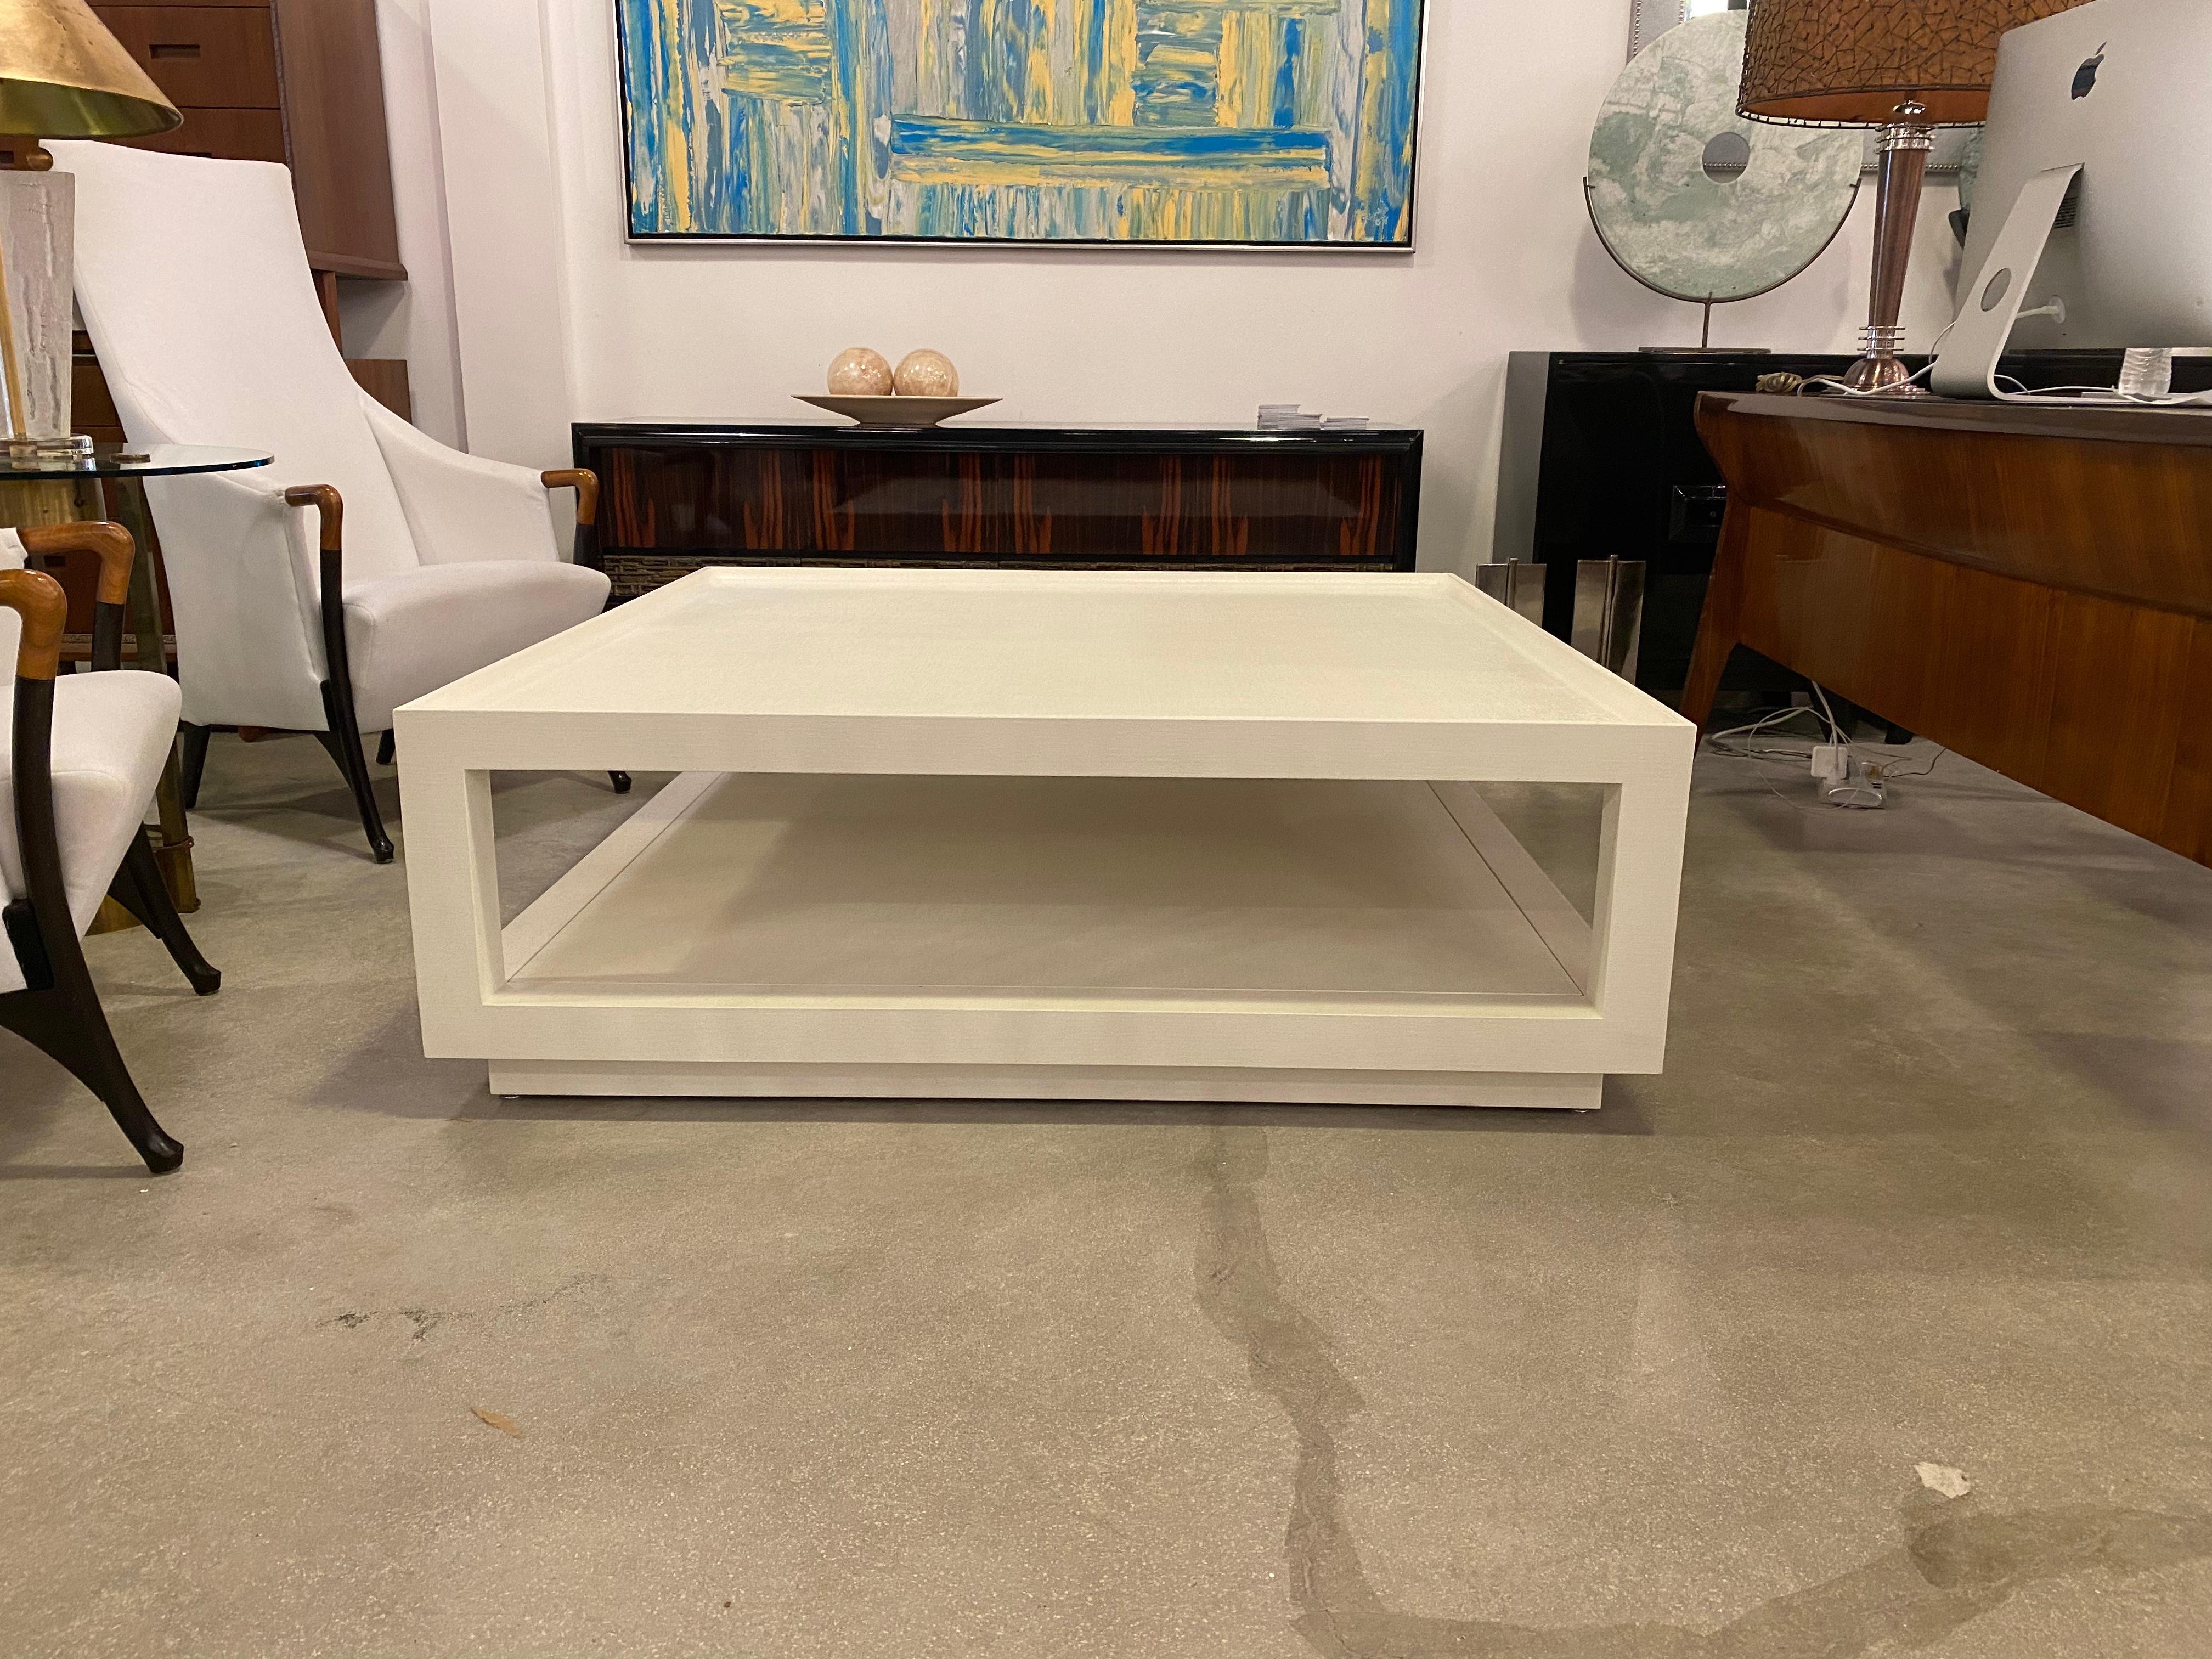 American Modern Tray Top Coffee Table, Karl Springer In Excellent Condition For Sale In Hollywood, FL